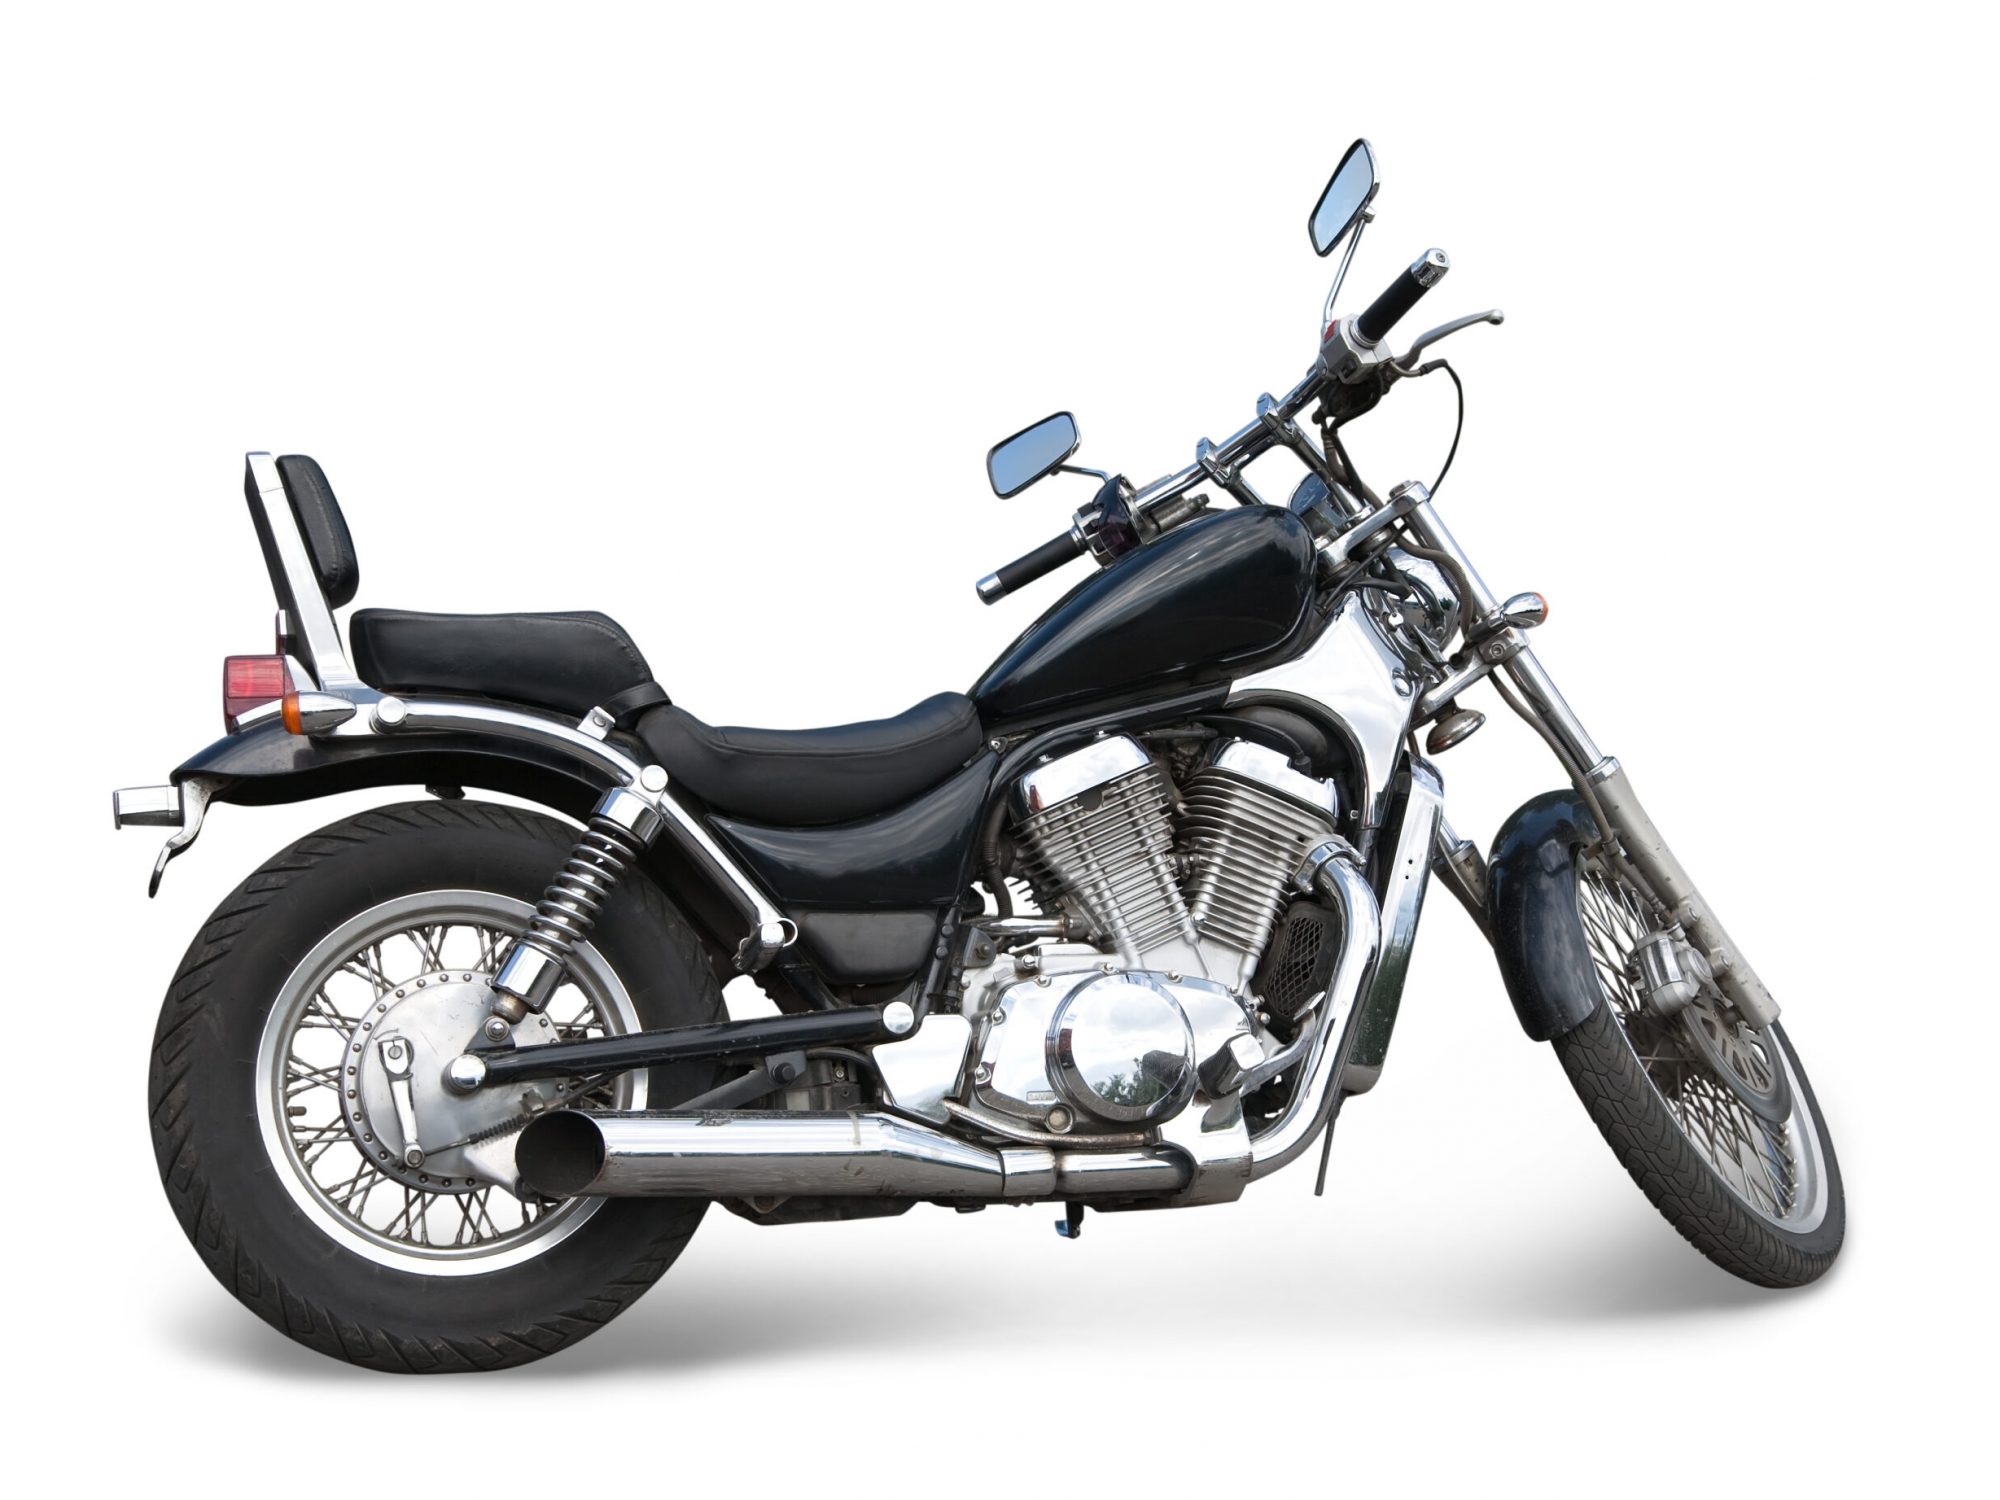 Big black  motorcycle. Isolated with clipping path